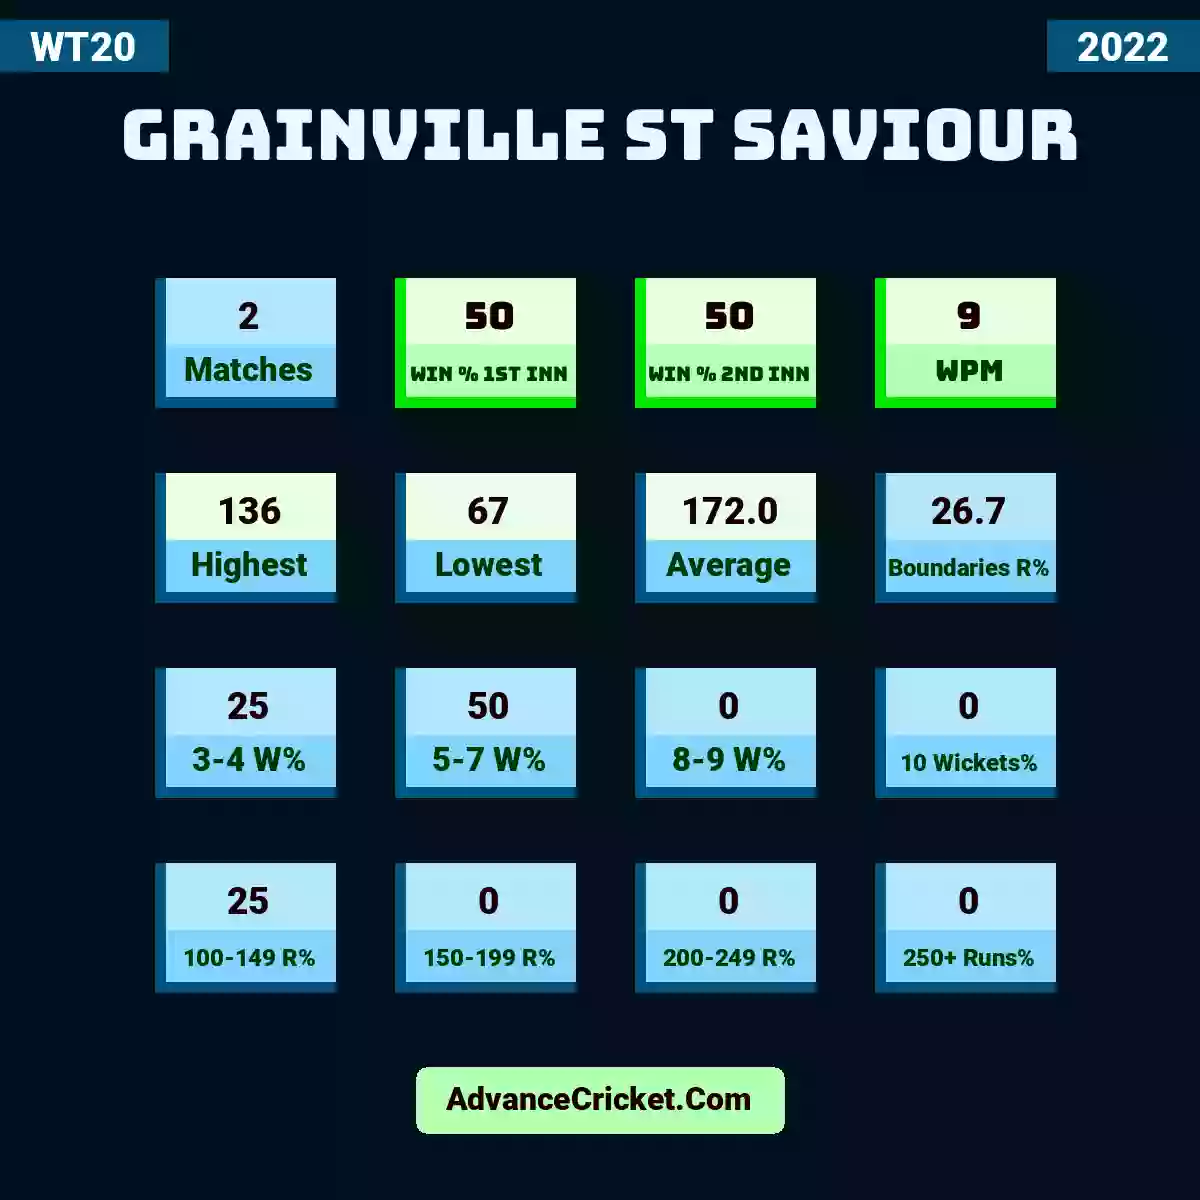 Image showing Grainville St Saviour with Matches: 2, Win % 1st Inn: 50, Win % 2nd Inn: 50, WPM: 9, Highest: 136, Lowest: 67, Average: 172.0, Boundaries R%: 26.7, 3-4 W%: 25, 5-7 W%: 50, 8-9 W%: 0, 10 Wickets%: 0, 100-149 R%: 25, 150-199 R%: 0, 200-249 R%: 0, 250+ Runs%: 0.